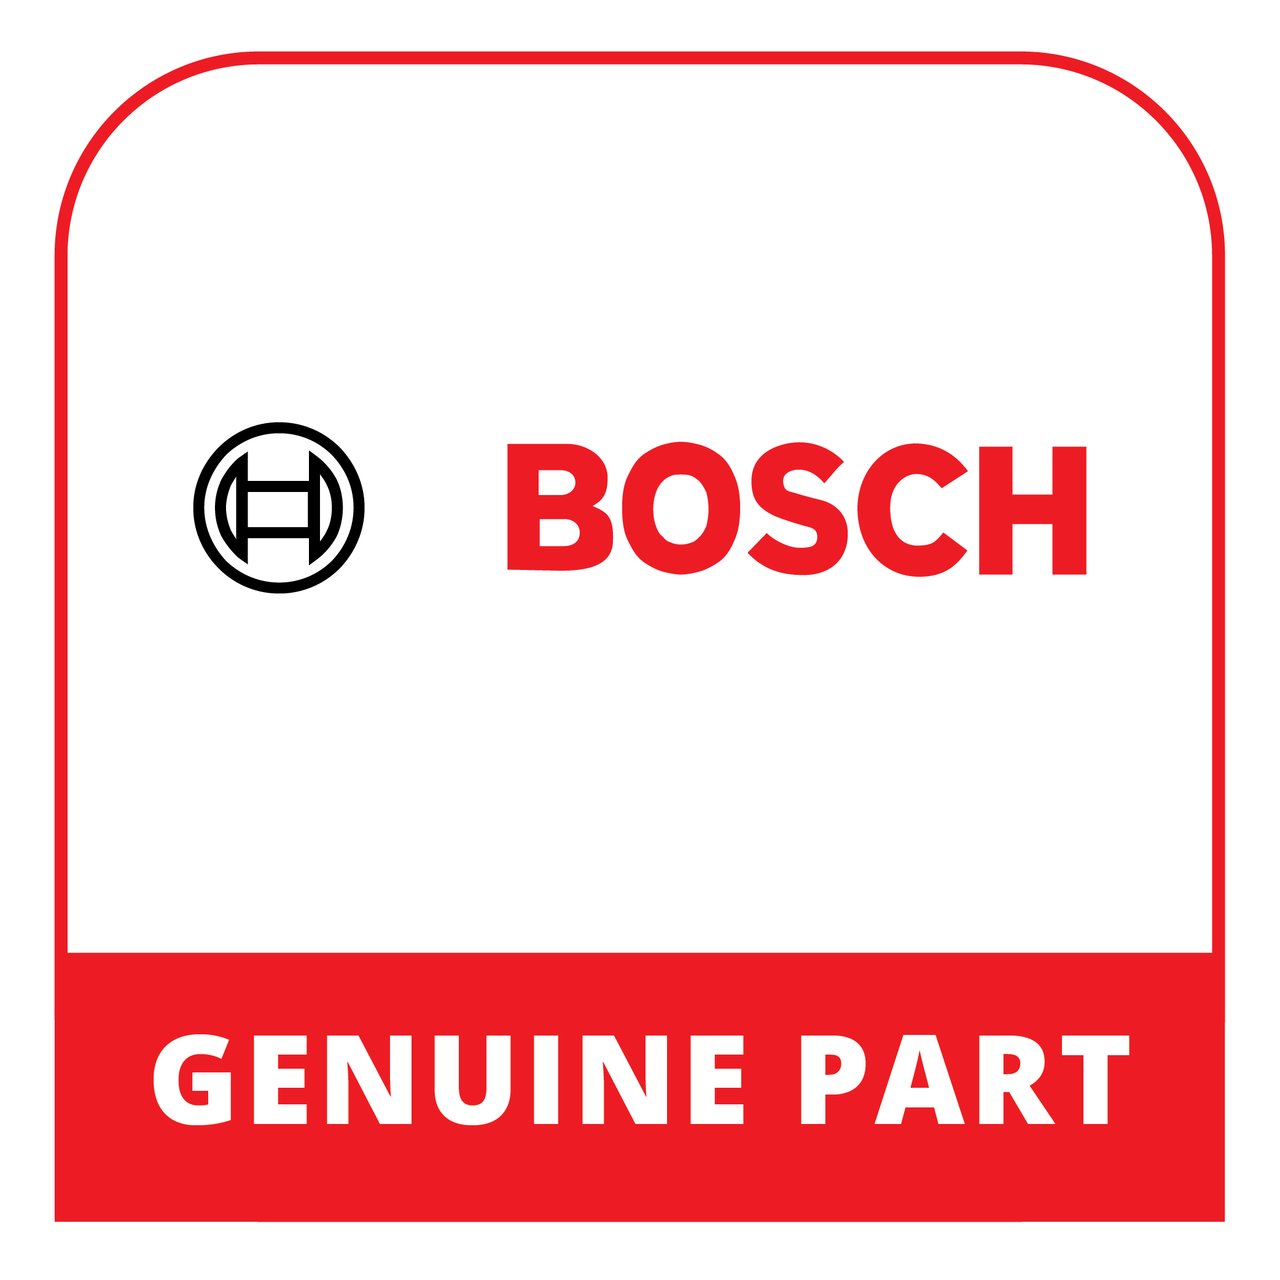 Bosch (Thermador) 12019751 - Hinge - Genuine Bosch (Thermador) Part